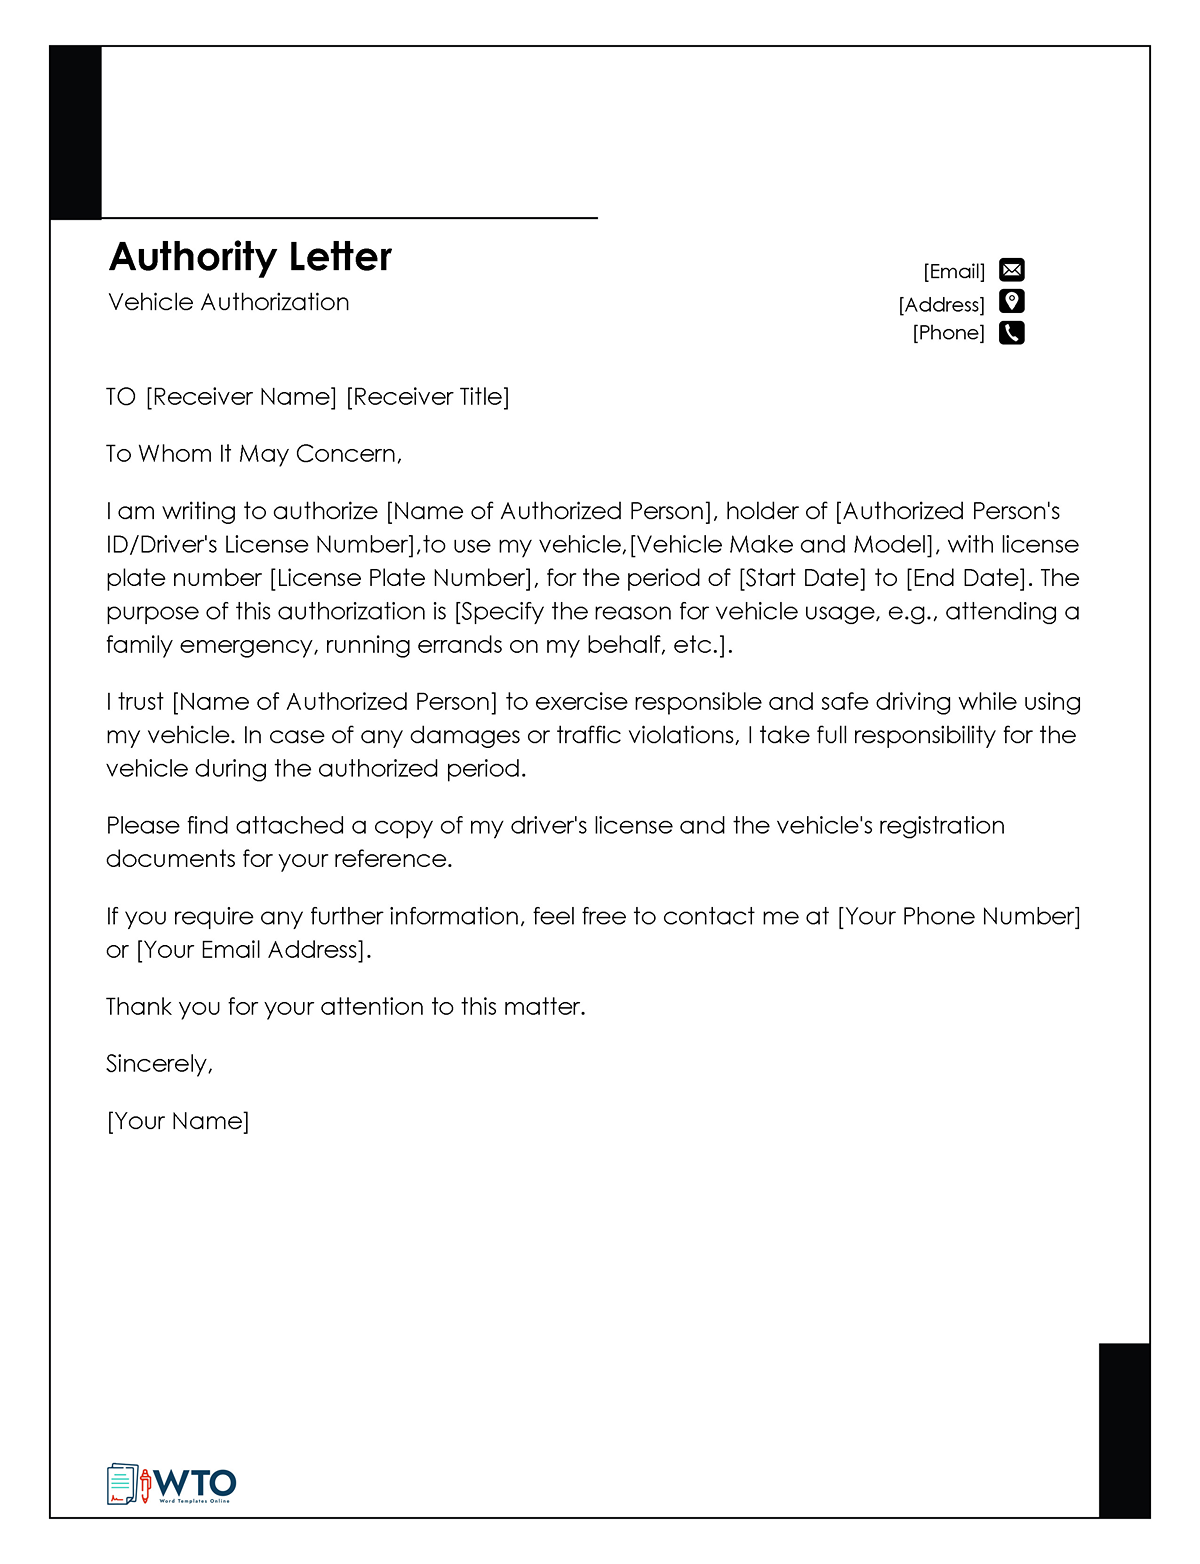 Vehicle Authorization Letter Template-Word Format